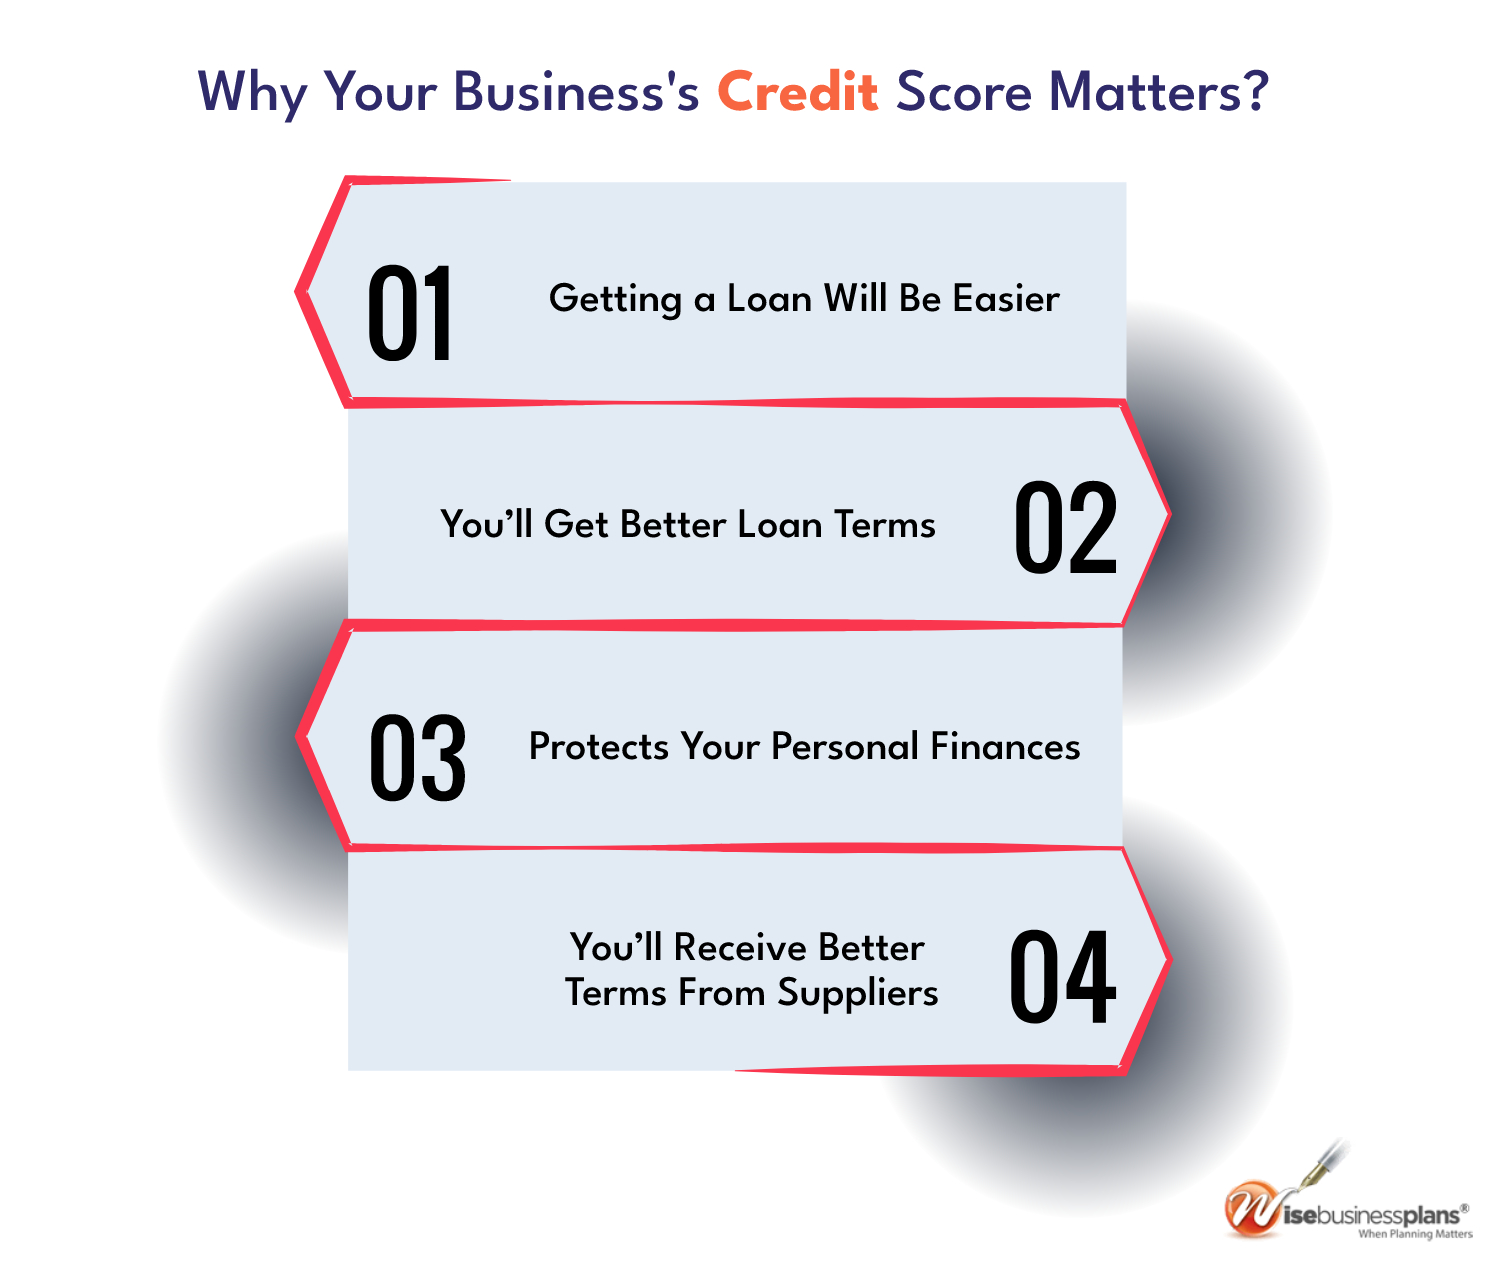 Why your business's credit score matters in net 30 vendors